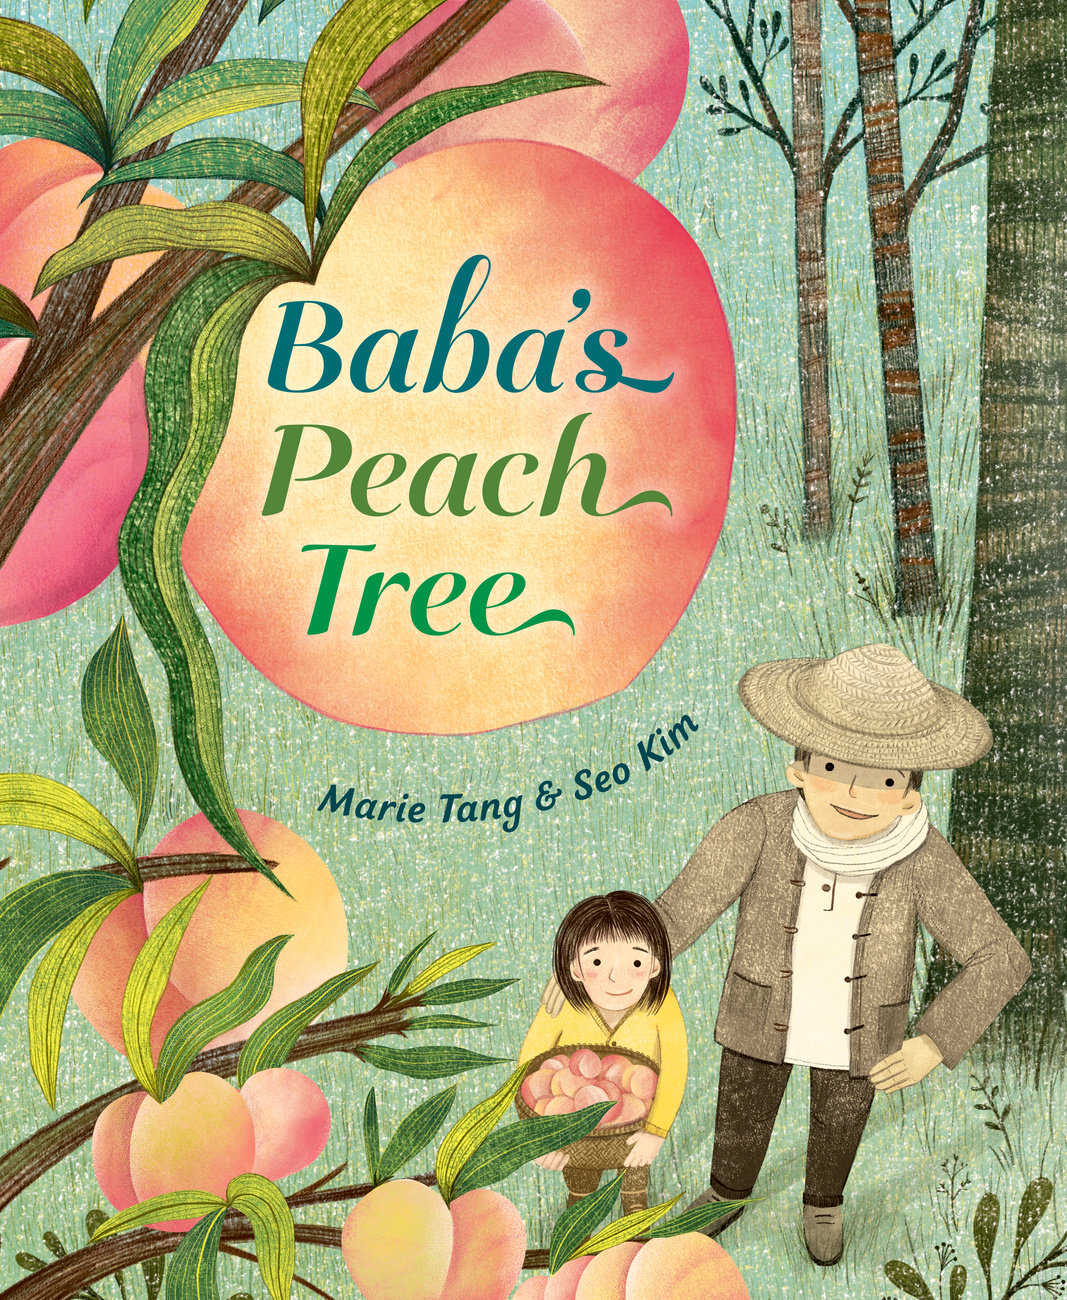 picture book babas peach tree